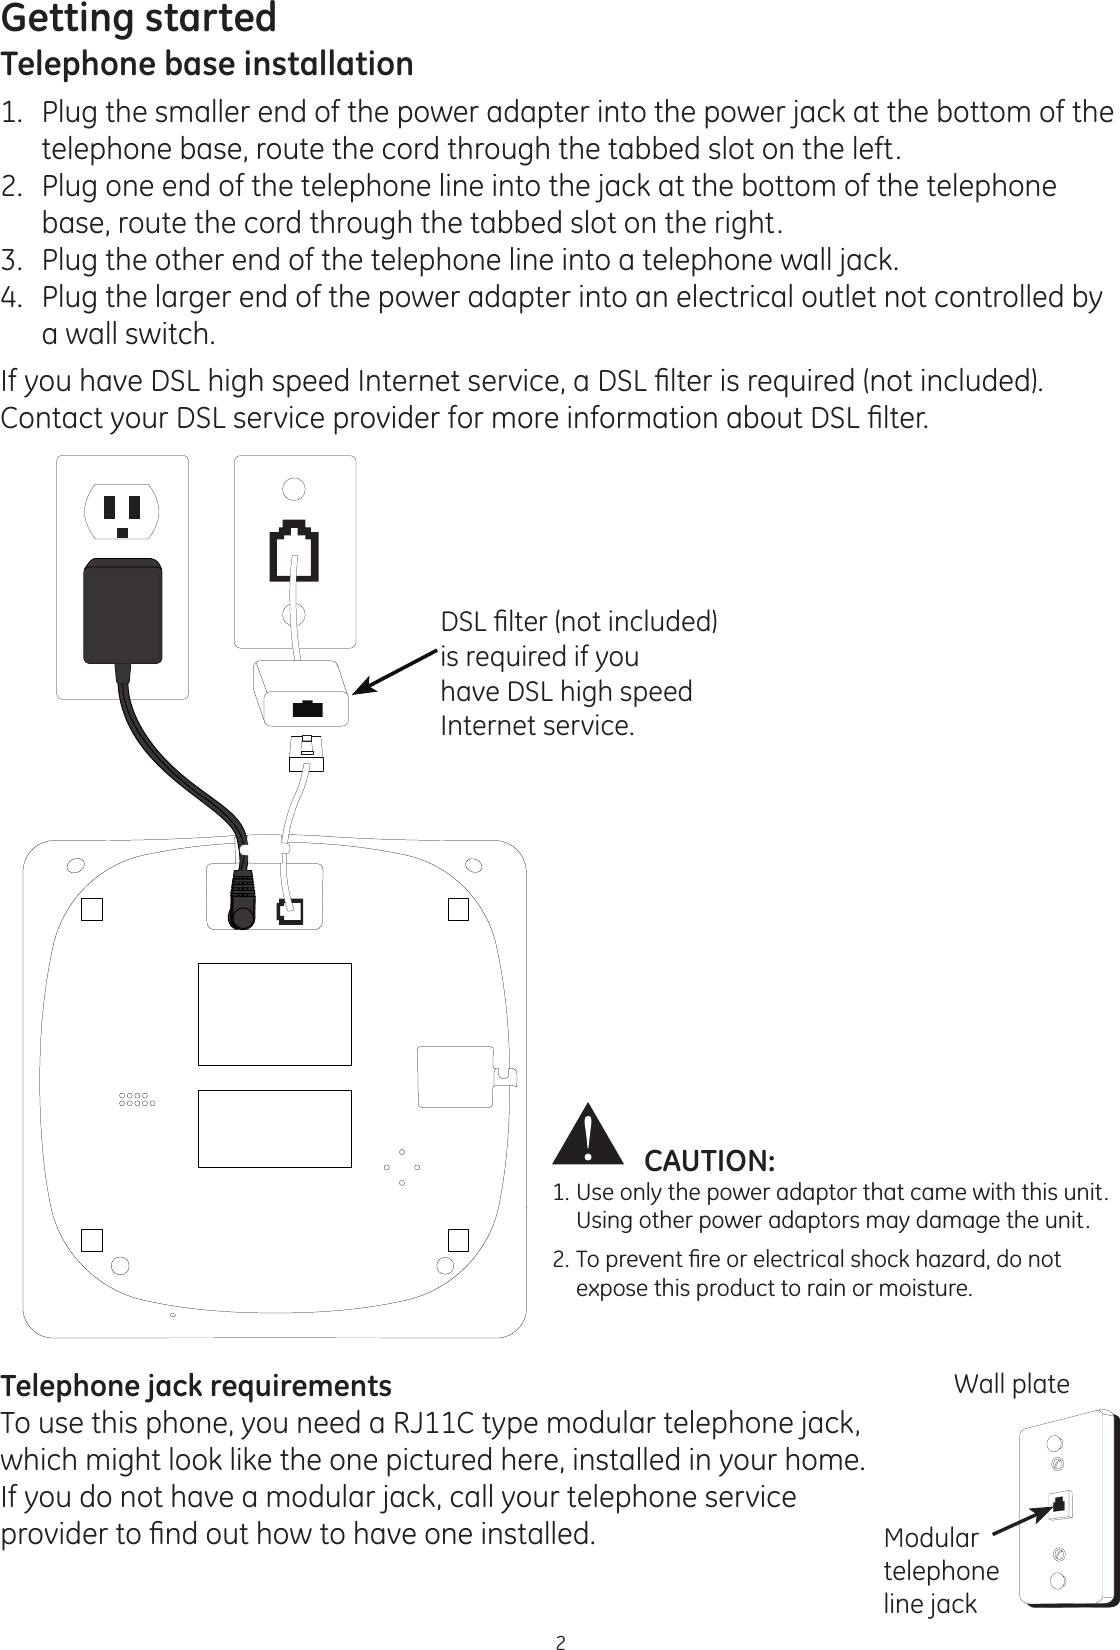 Getting started2CAUTION: 1. Use only the power adaptor that came with this unit.    Using other power adaptors may damage the unit.7RSUHYHQW¿UHRUHOHFWULFDOVKRFNKD]DUGGRQRW  expose this product to rain or moisture. Telephone base installation1.   Plug the smaller end of the power adapter into the power jack at the bottom of the telephone base, route the cord through the tabbed slot on the left.2.   Plug one end of the telephone line into the jack at the bottom of the telephone base, route the cord through the tabbed slot on the right.3.   Plug the other end of the telephone line into a telephone wall jack.4.   Plug the larger end of the power adapter into an electrical outlet not controlled by a wall switch.,I\RXKDYH&apos;6/KLJKVSHHG,QWHUQHWVHUYLFHD&apos;6/¿OWHULVUHTXLUHGQRWLQFOXGHG&amp;RQWDFW\RXU&apos;6/VHUYLFHSURYLGHUIRUPRUHLQIRUPDWLRQDERXW&apos;6/¿OWHU&apos;6/¿OWHUQRWLQFOXGHGis required if you have DSL high speed Internet service.Telephone jack requirementsTo use this phone, you need a RJ11C type modular telephone jack, which might look like the one pictured here, installed in your home. If you do not have a modular jack, call your telephone service SURYLGHUWR¿QGRXWKRZWRKDYHRQHLQVWDOOHGWall plateModular telephone line jack